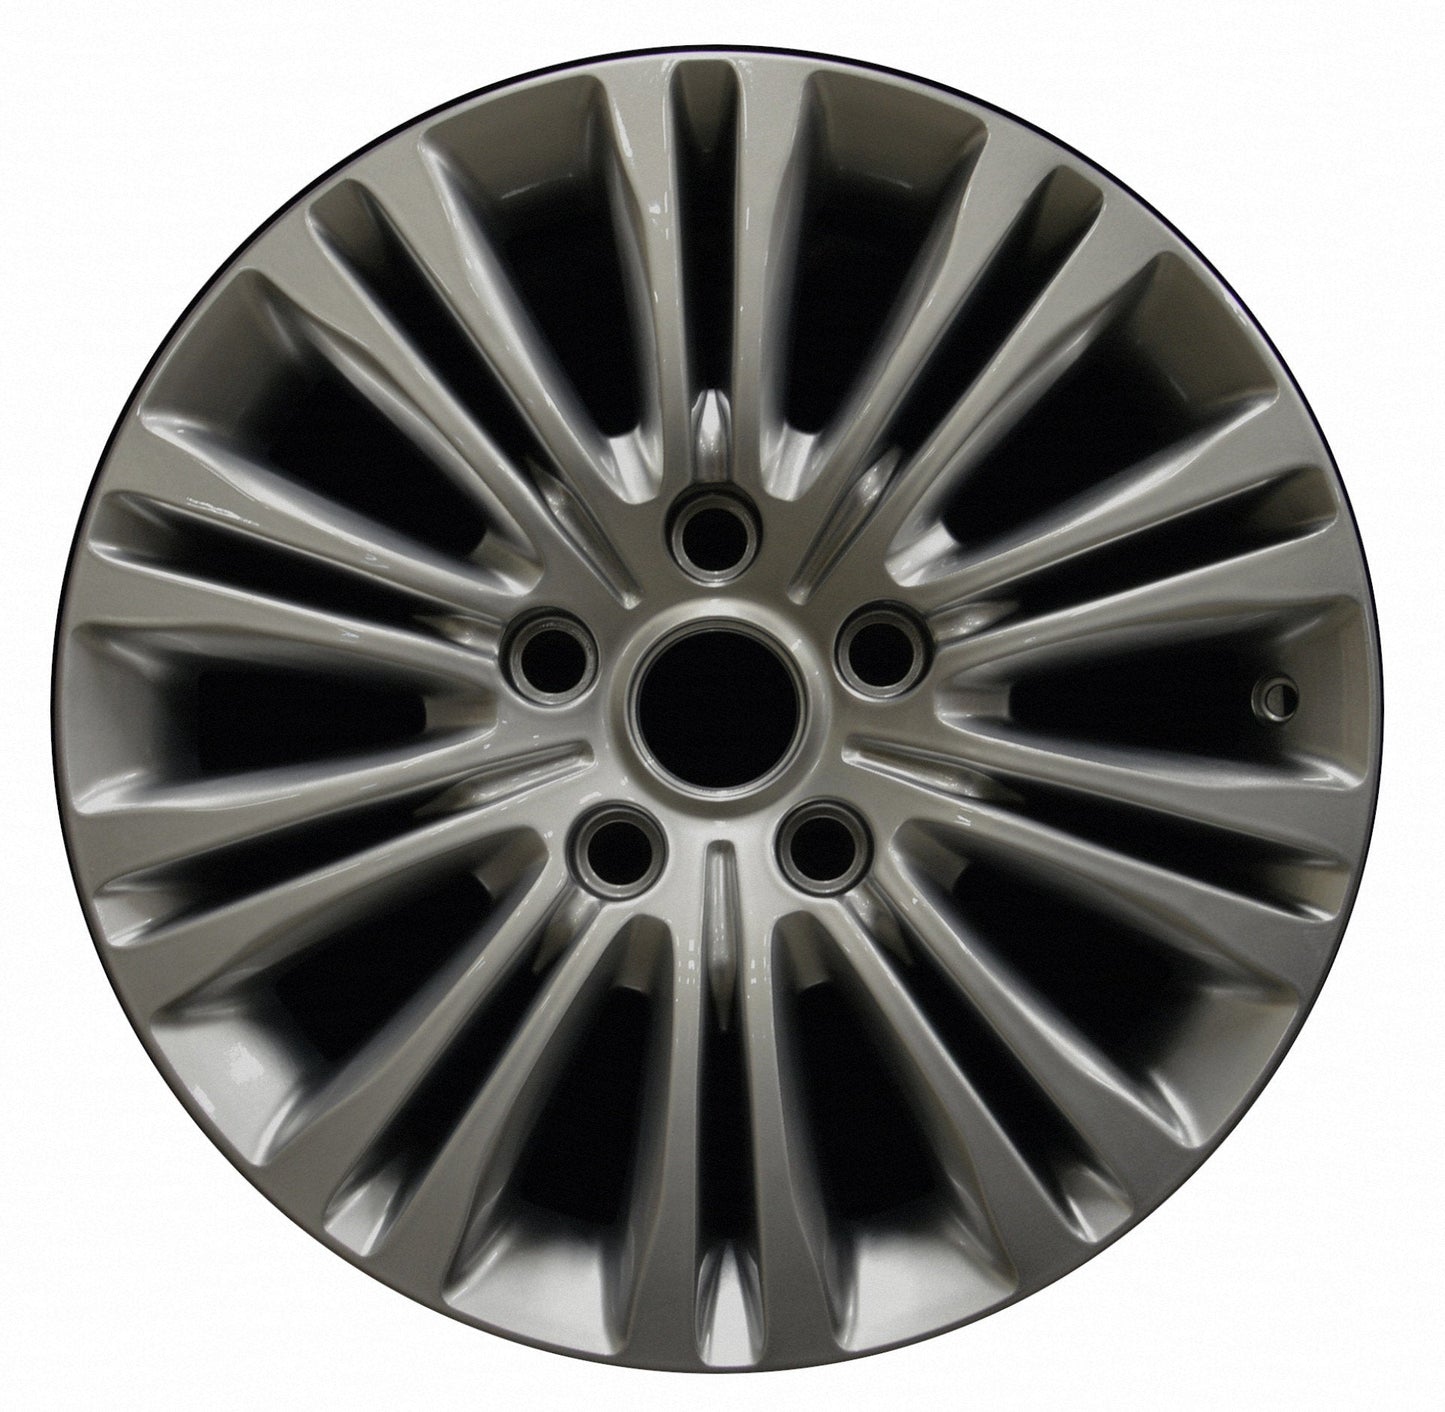 Chrysler Town & Country  2011, 2012, 2013, 2014, 2015, 2016 Factory OEM Car Wheel Size 17x6.5 Alloy WAO.2402.LS100V2.FF